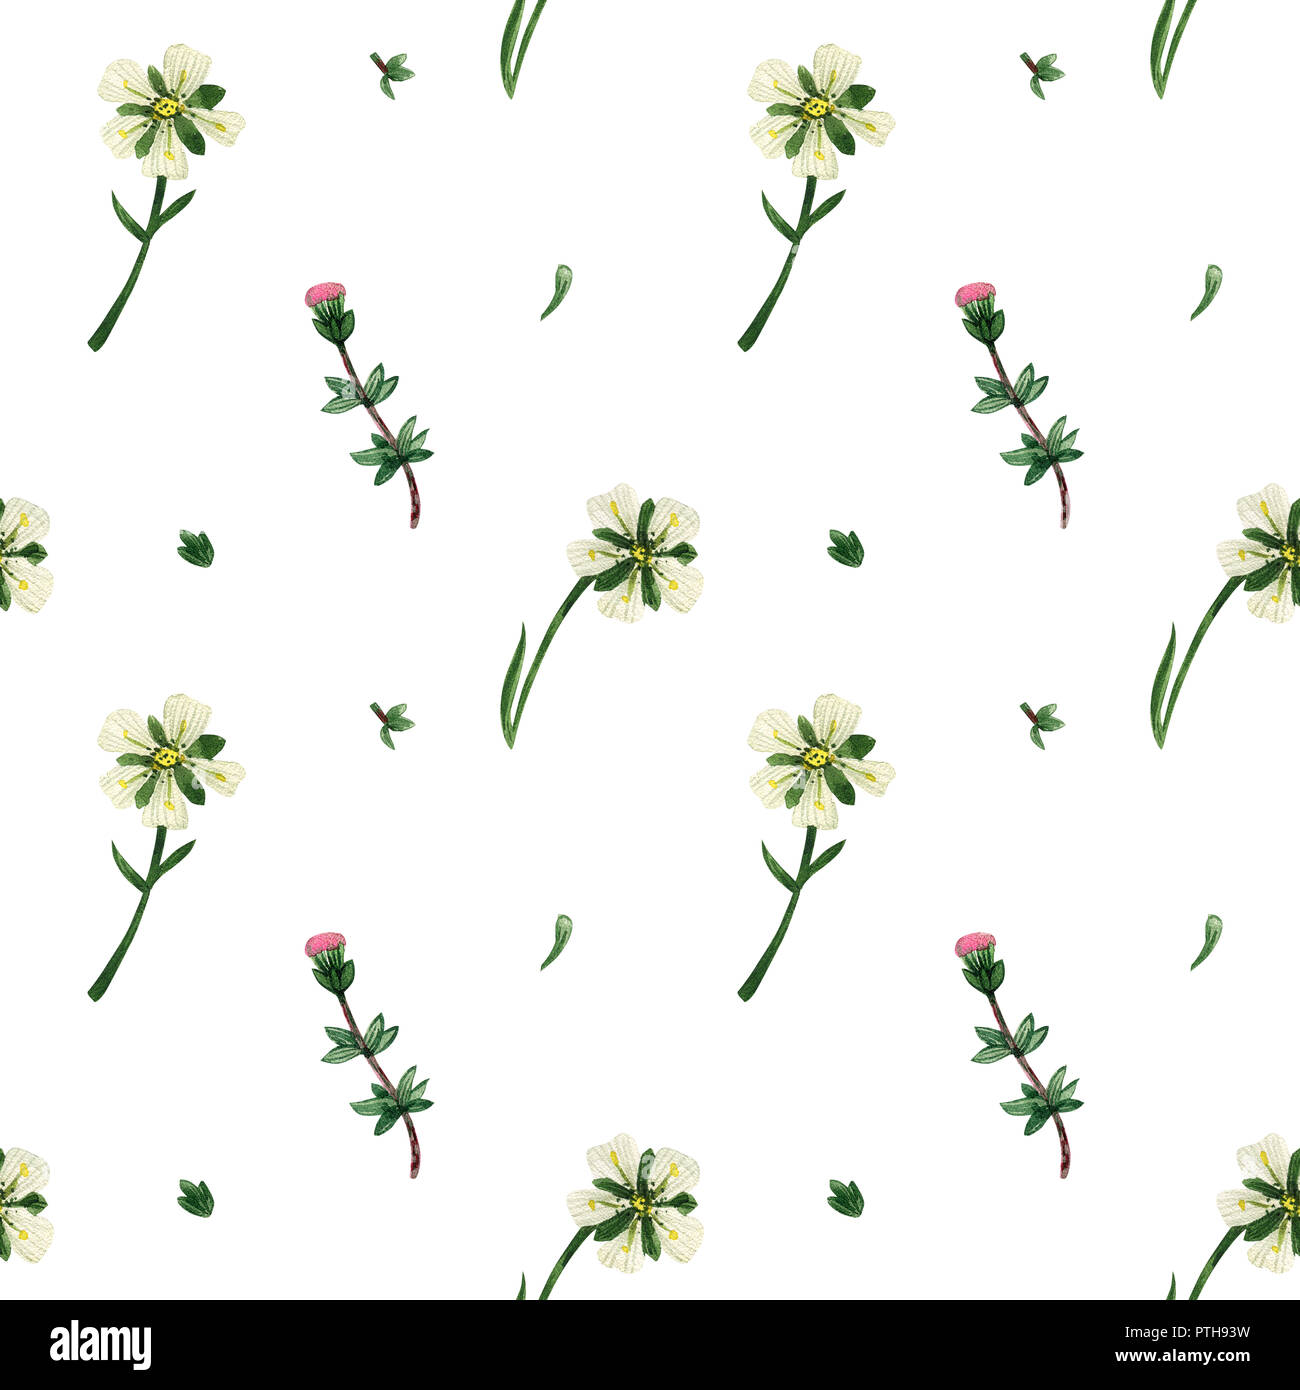 Wild plants of Scotland seamless pattern. Heather and Arctic Stitchwort flowers. Watercolor on a white background, path included Stock Photo